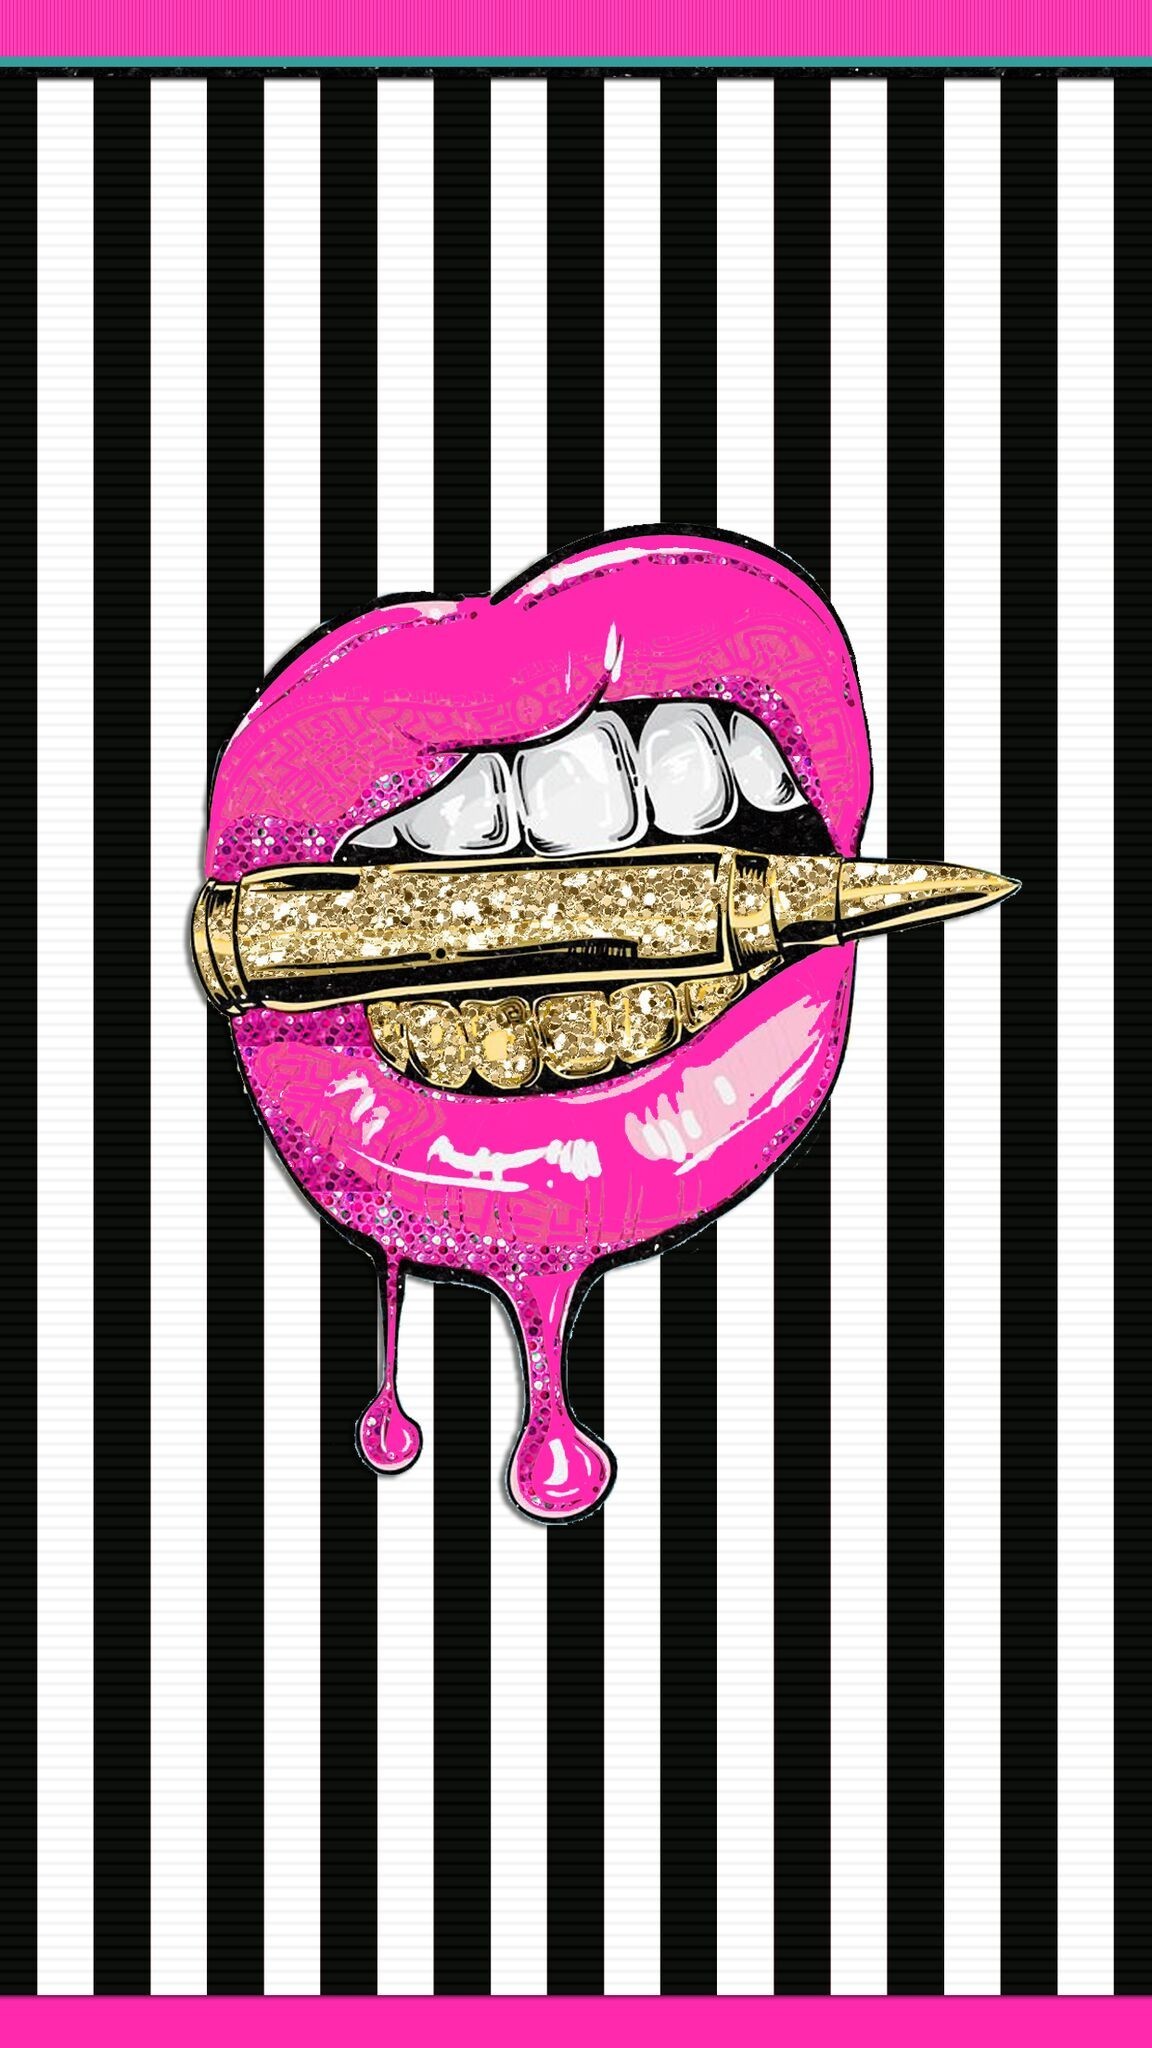 Dope Wallpapers, Iphone 3, Pink Wallpaper, Betsey Johnson, Kisses, Bullet, Zombies, Pop Culture, Hello Kitty